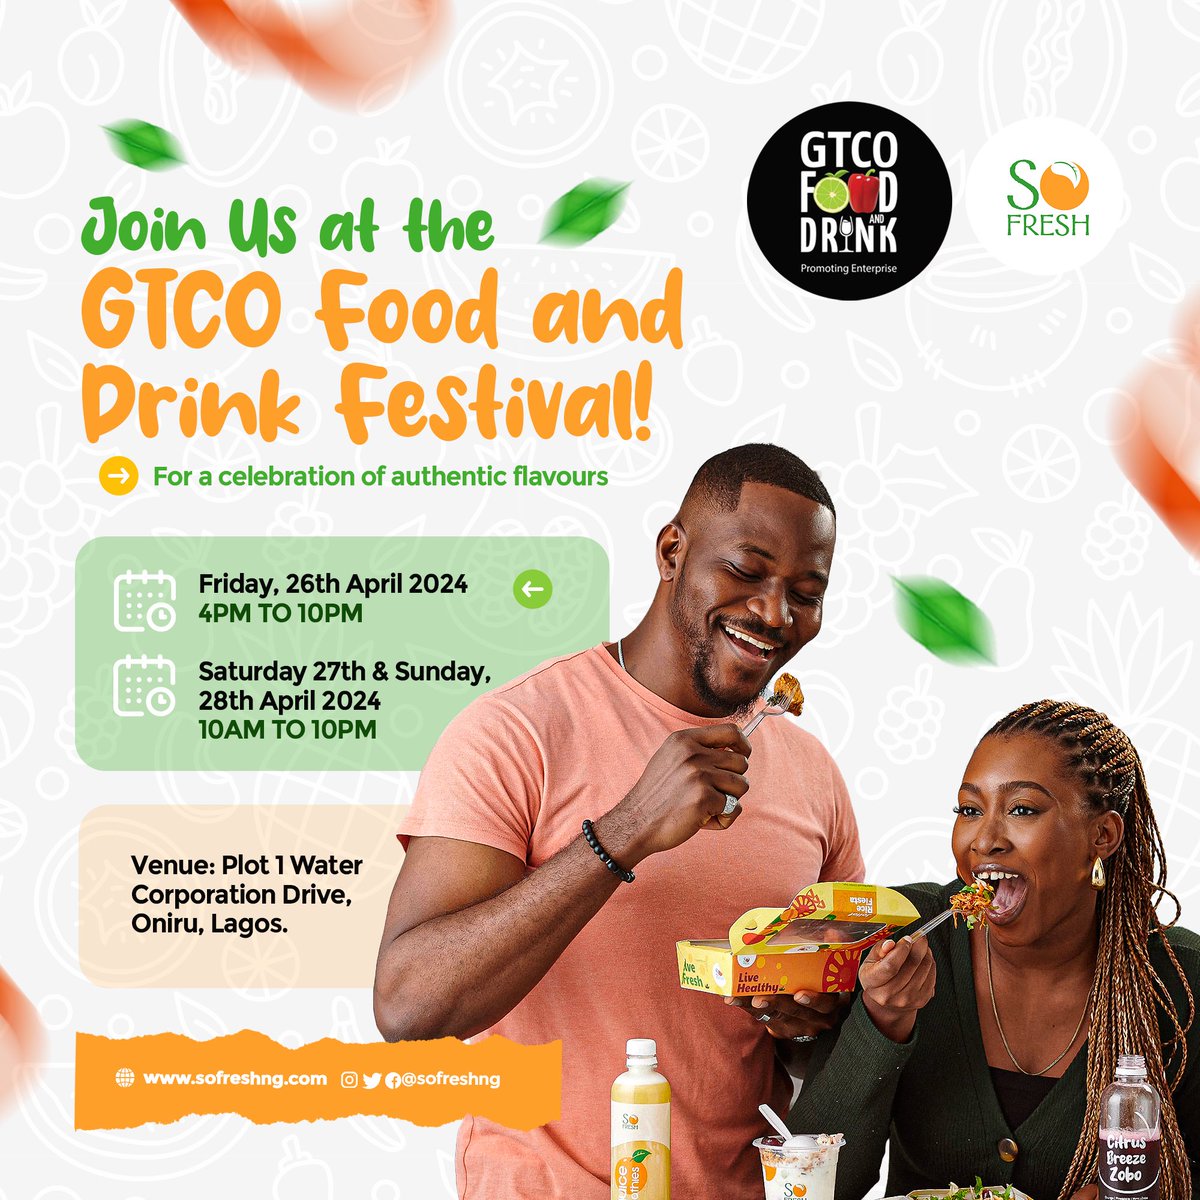 Join Us at the @gtbank GTCO Food and Drink Festival! For a celebration of authentic flavours🎉😊 🍴Date: Friday, 26th April 2024 4pm to 10pm Saturday 27th and Sunday, 28th April 2024 10am to 10pm 📍 Venue: Plot 1 Water Corporation Drive, Oniru, Lagos. #sofreshng #gtbank